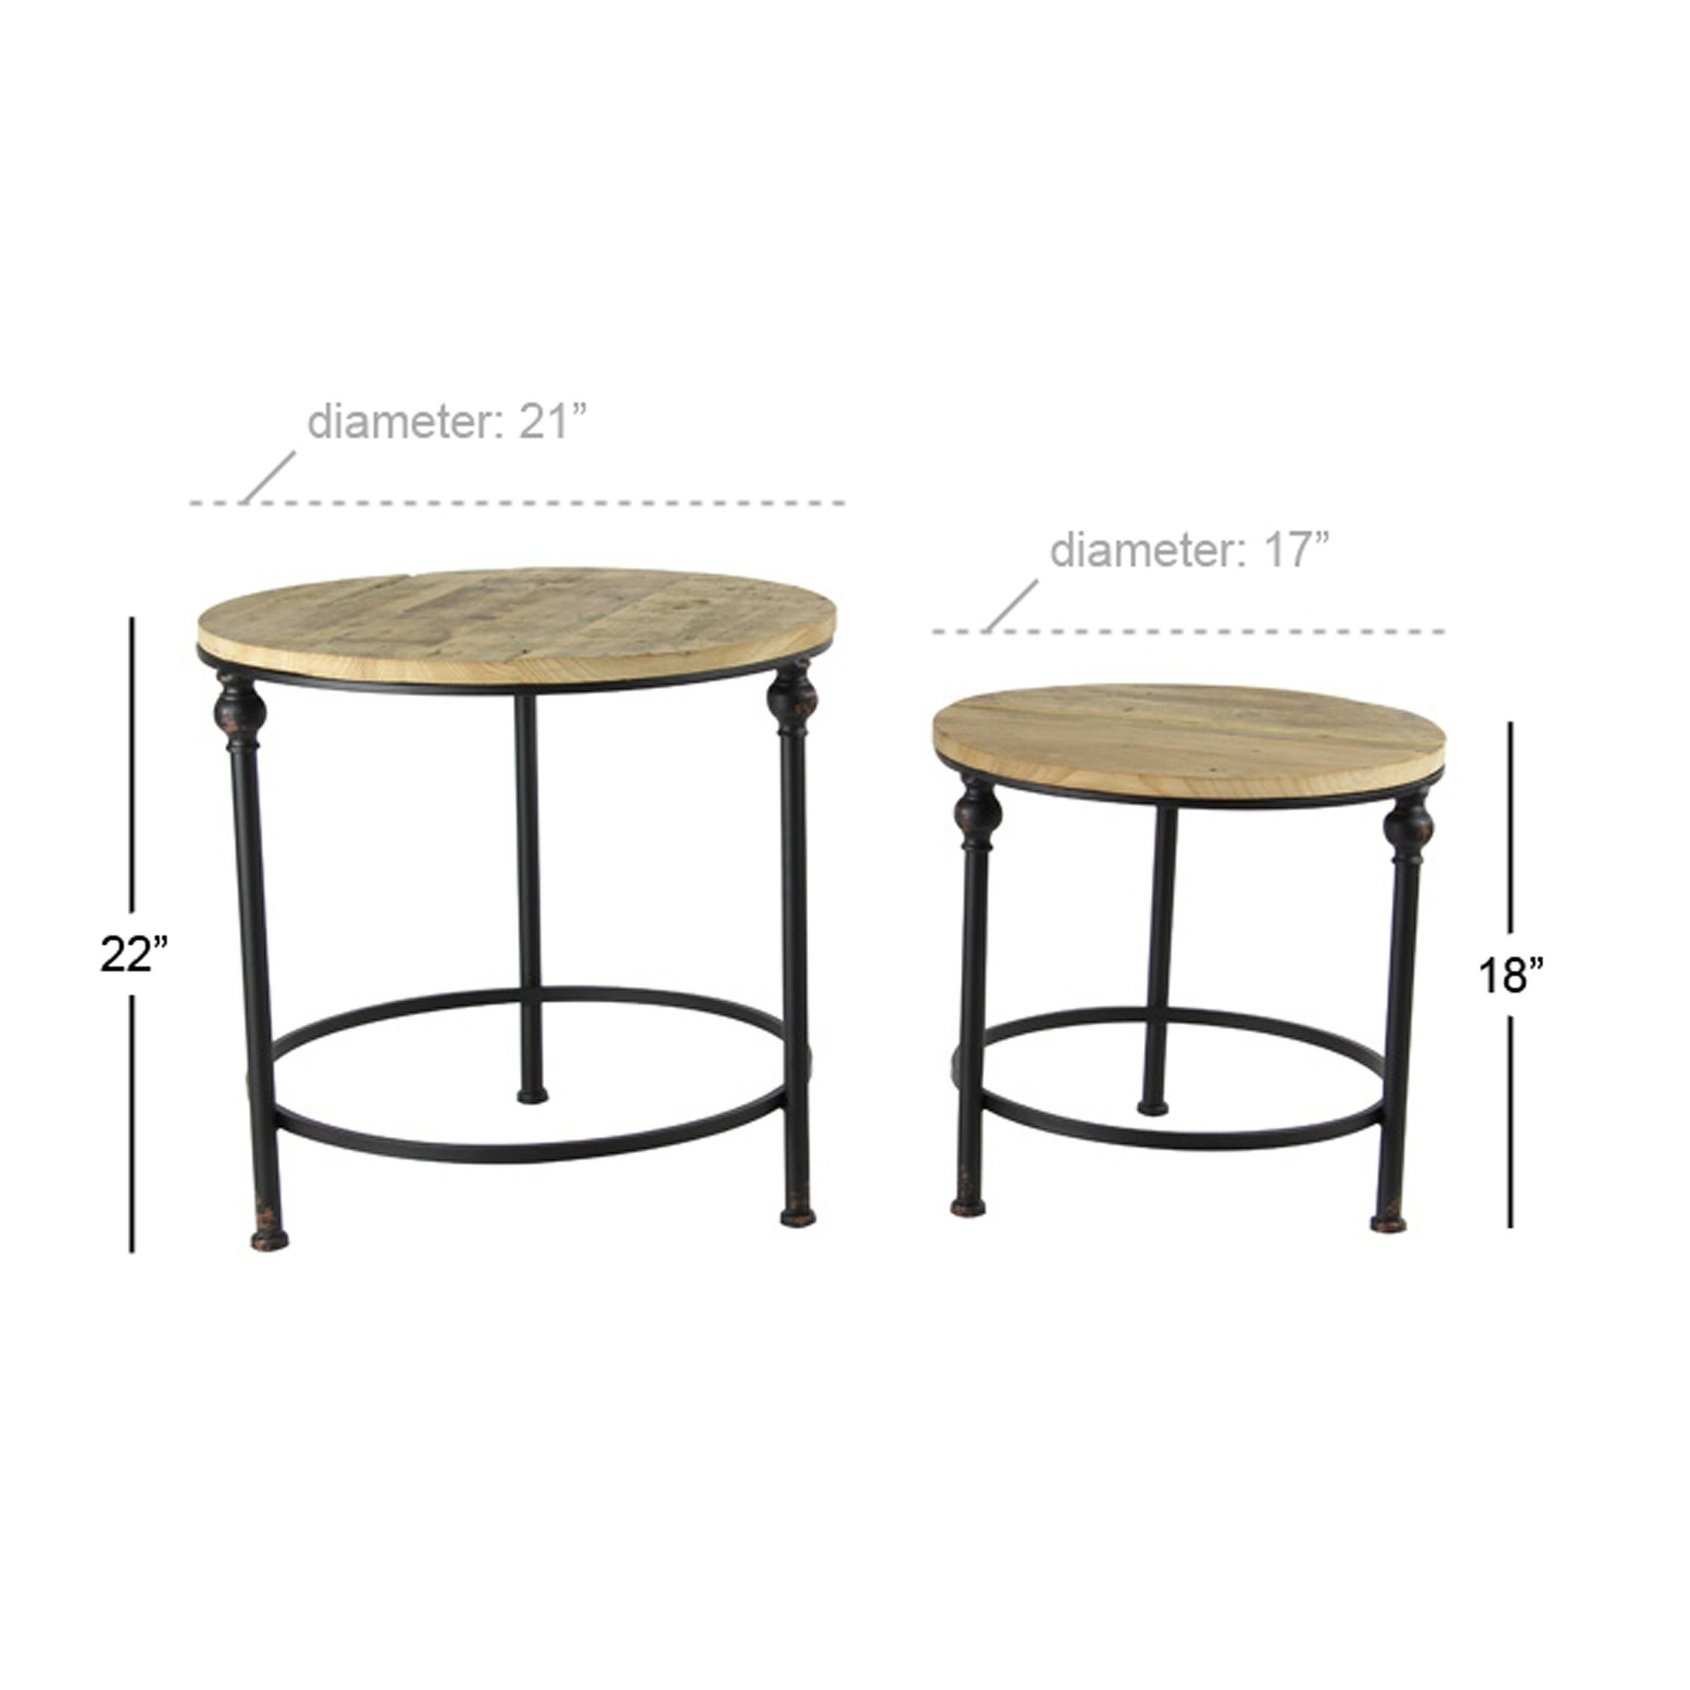 set rustic and inch wood iron round accent tables table free shipping today small end with drawer parsons dining room furniture names living spaces counter height leaf reclaimed